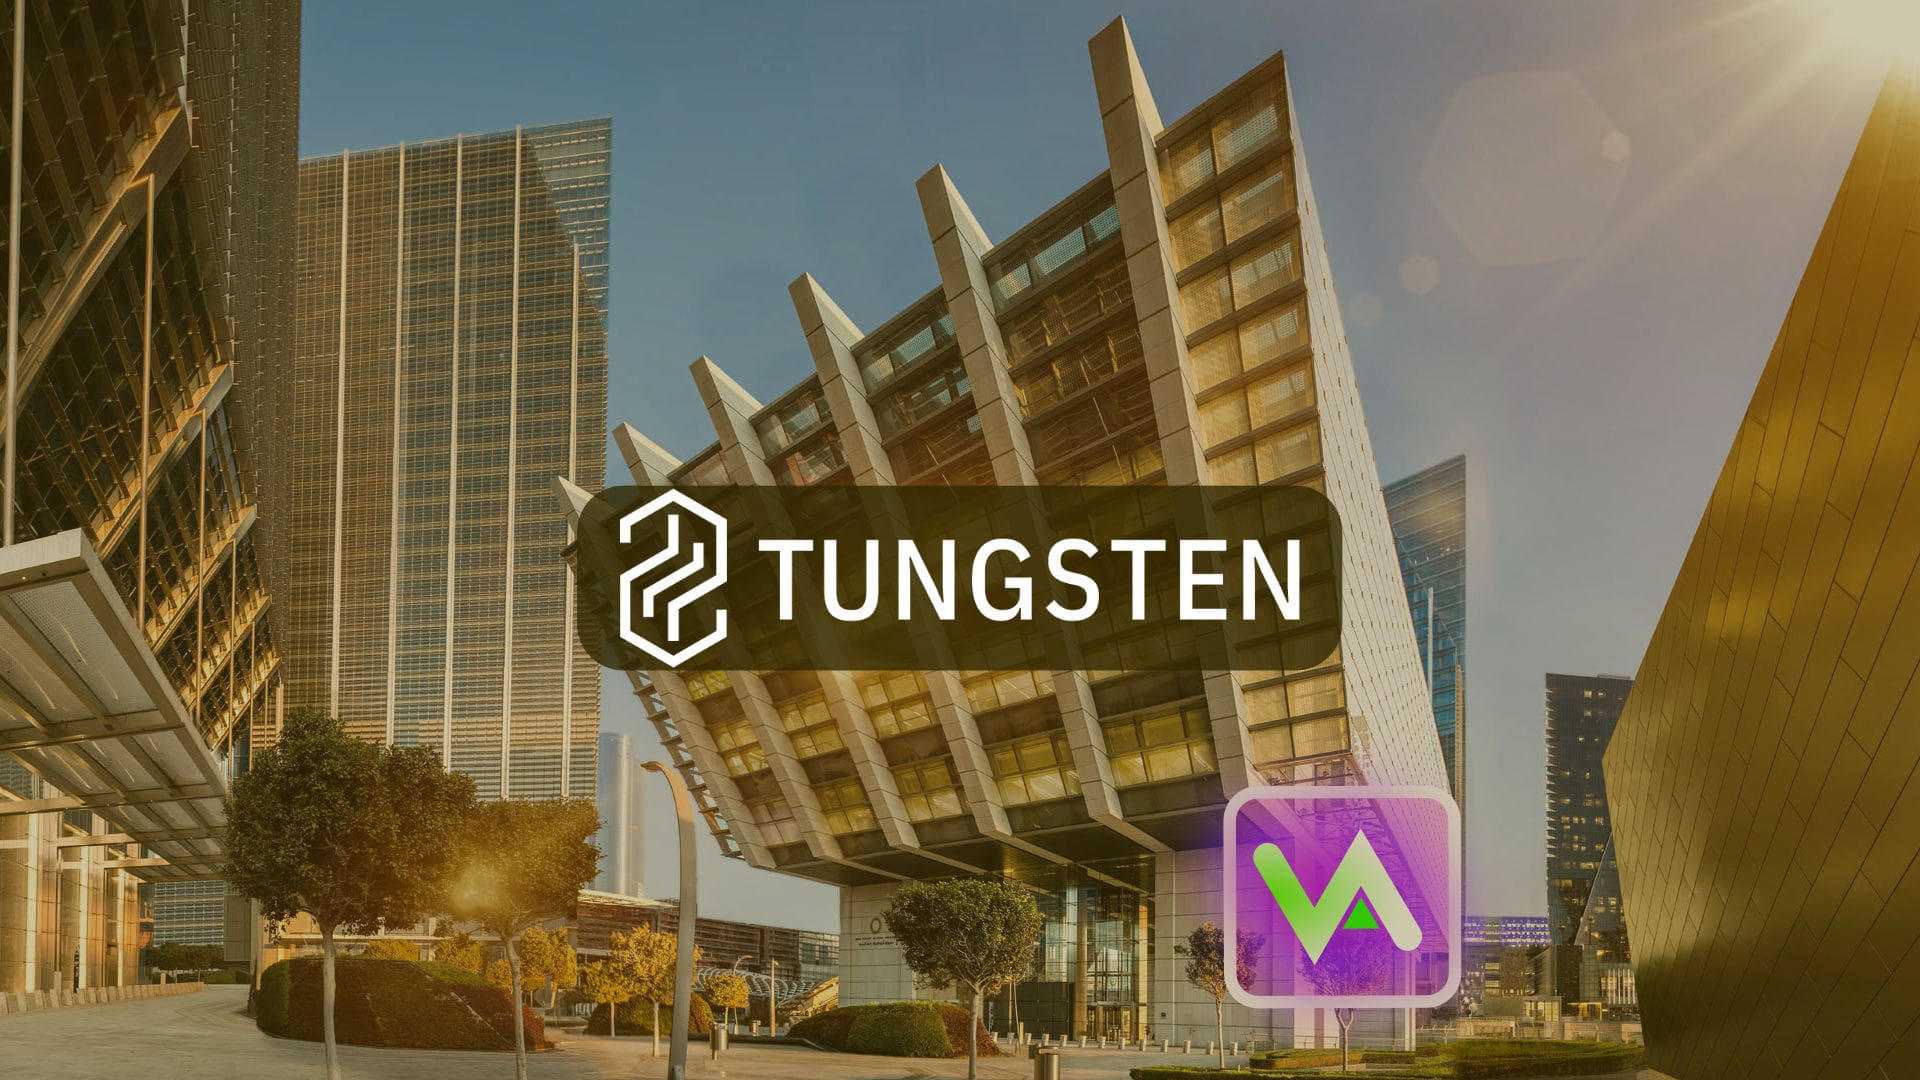 Abu Dhabi's Tungsten Launches Custody Services for Virtual Assets